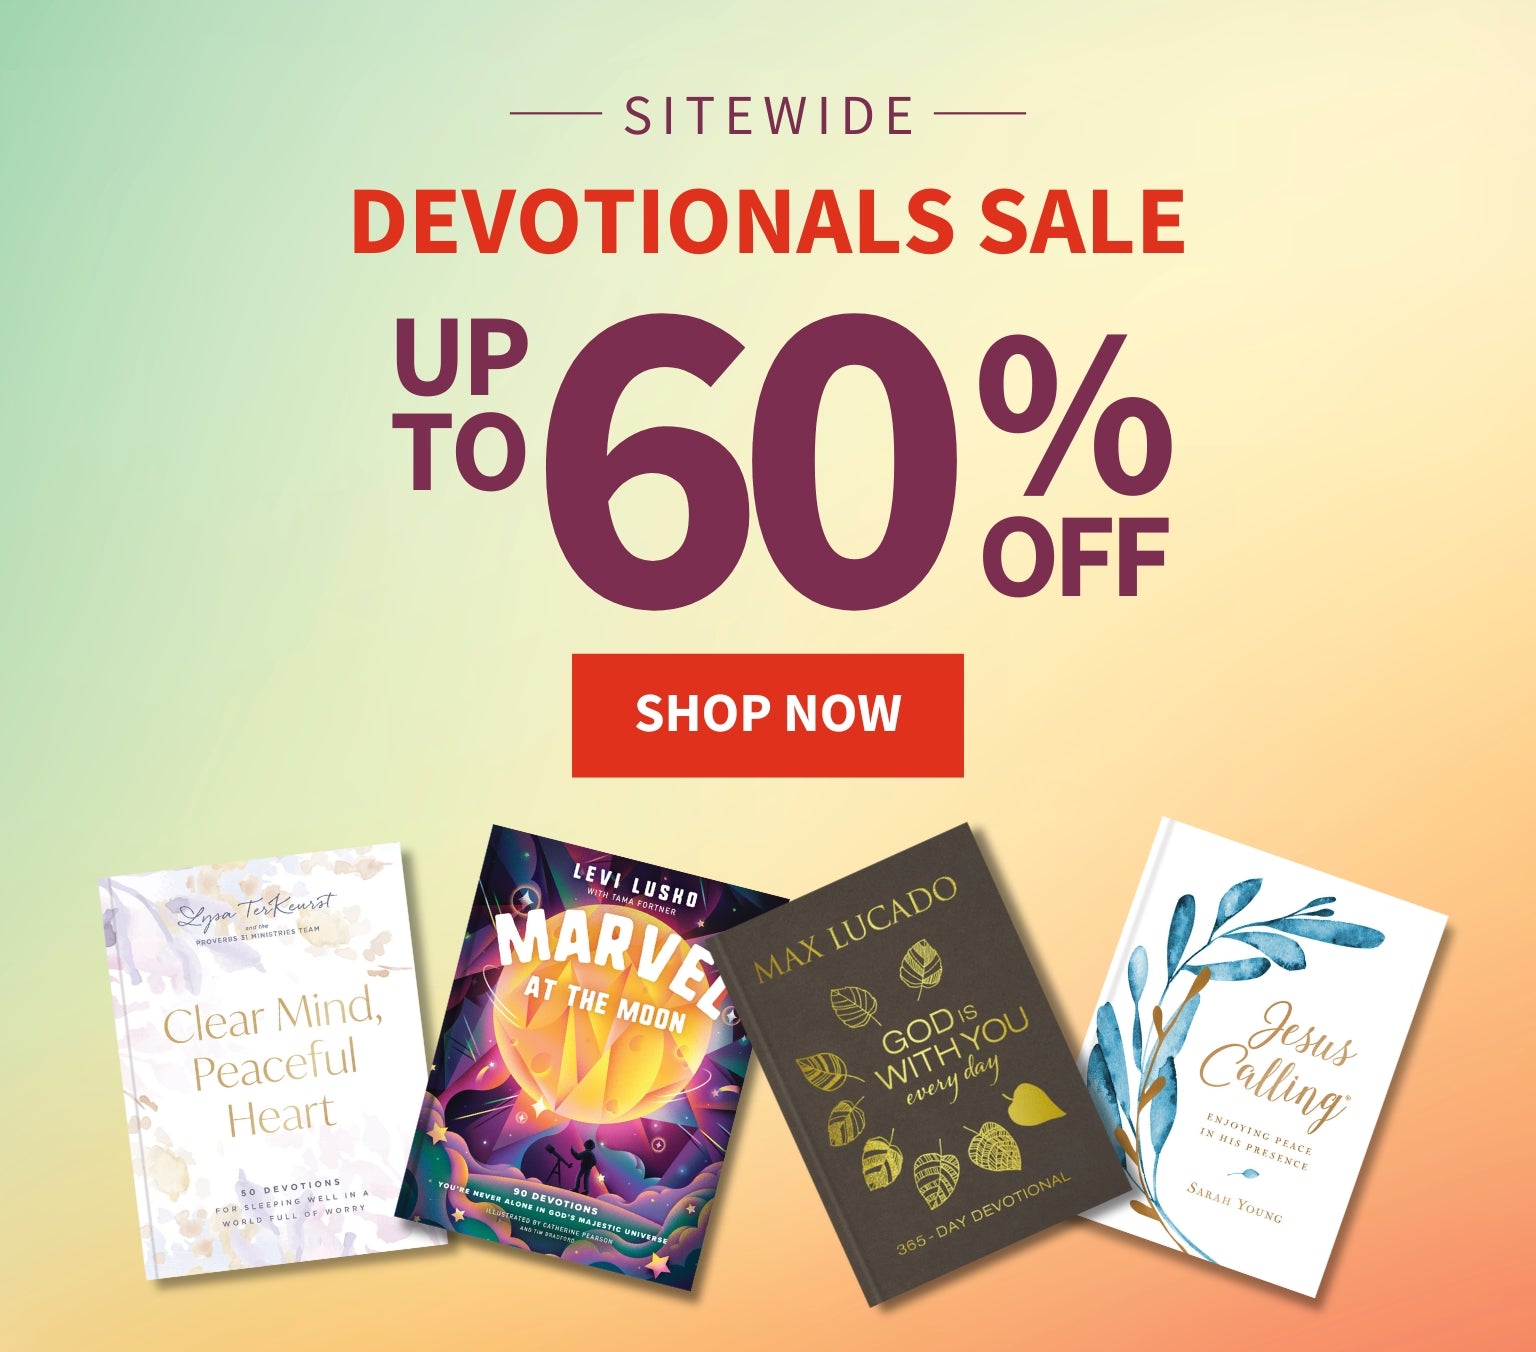 Sitewide Devotionals Sale Up to 60% Off - Shop Now